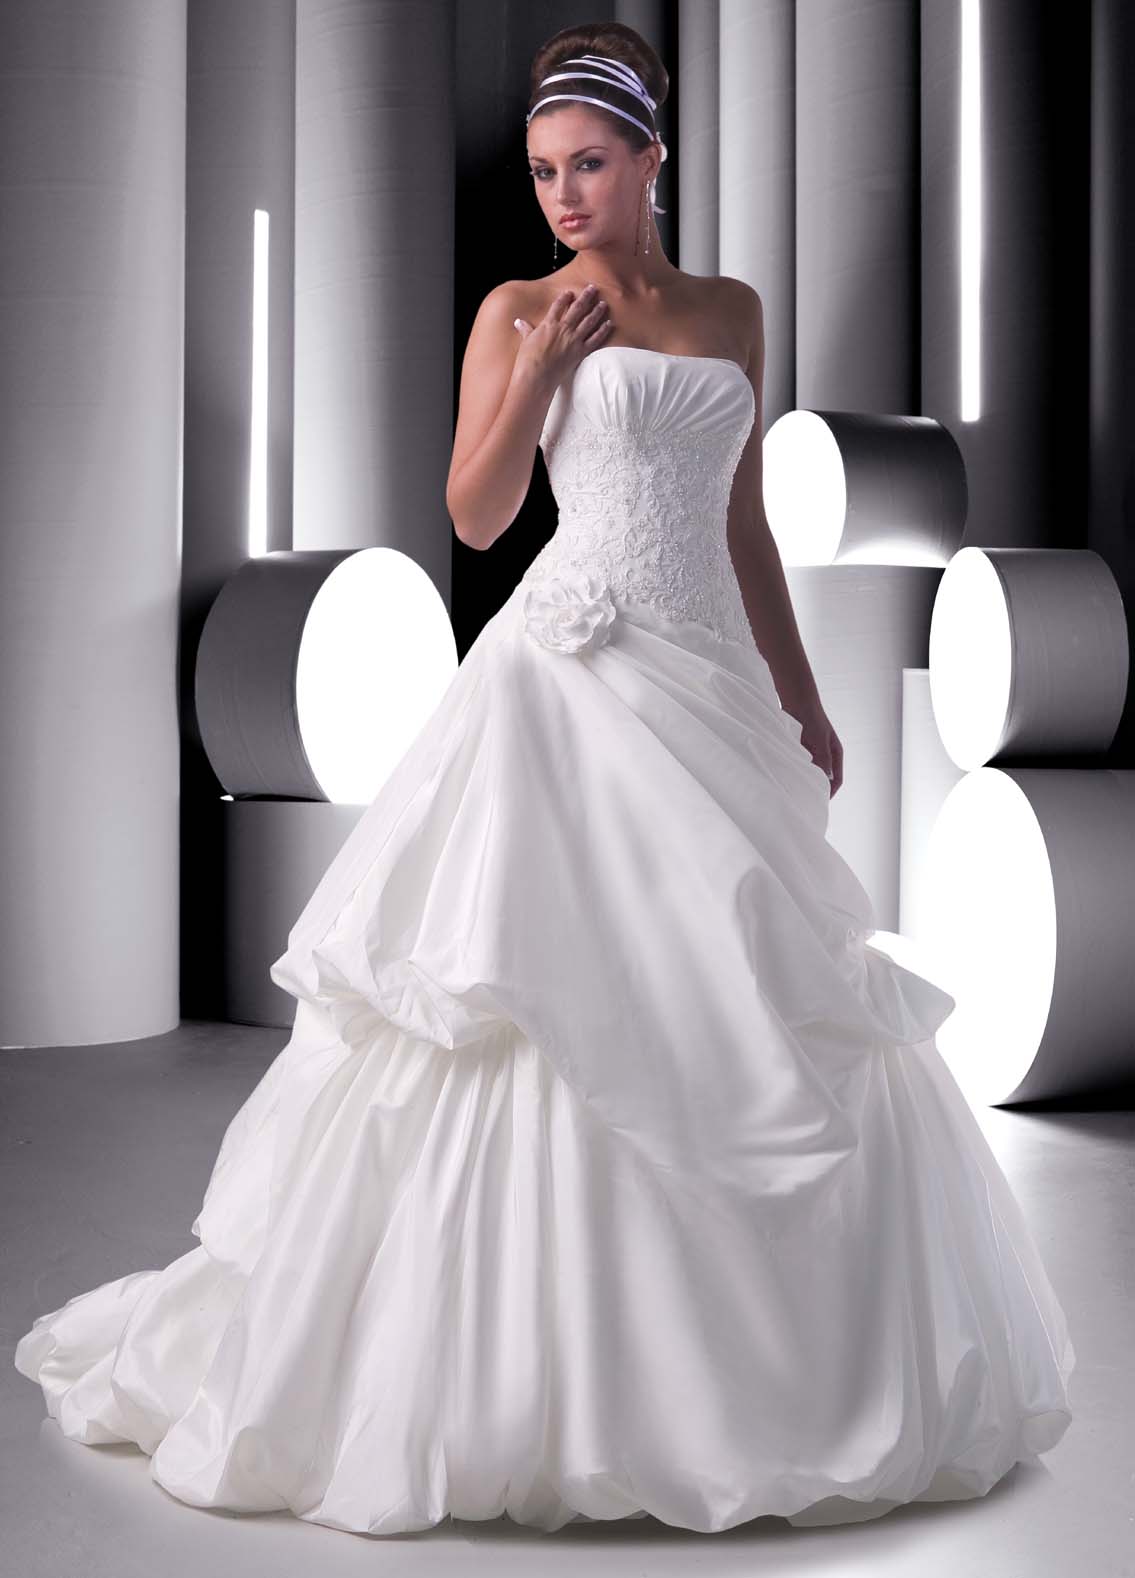 wedding dress with bubble skirt